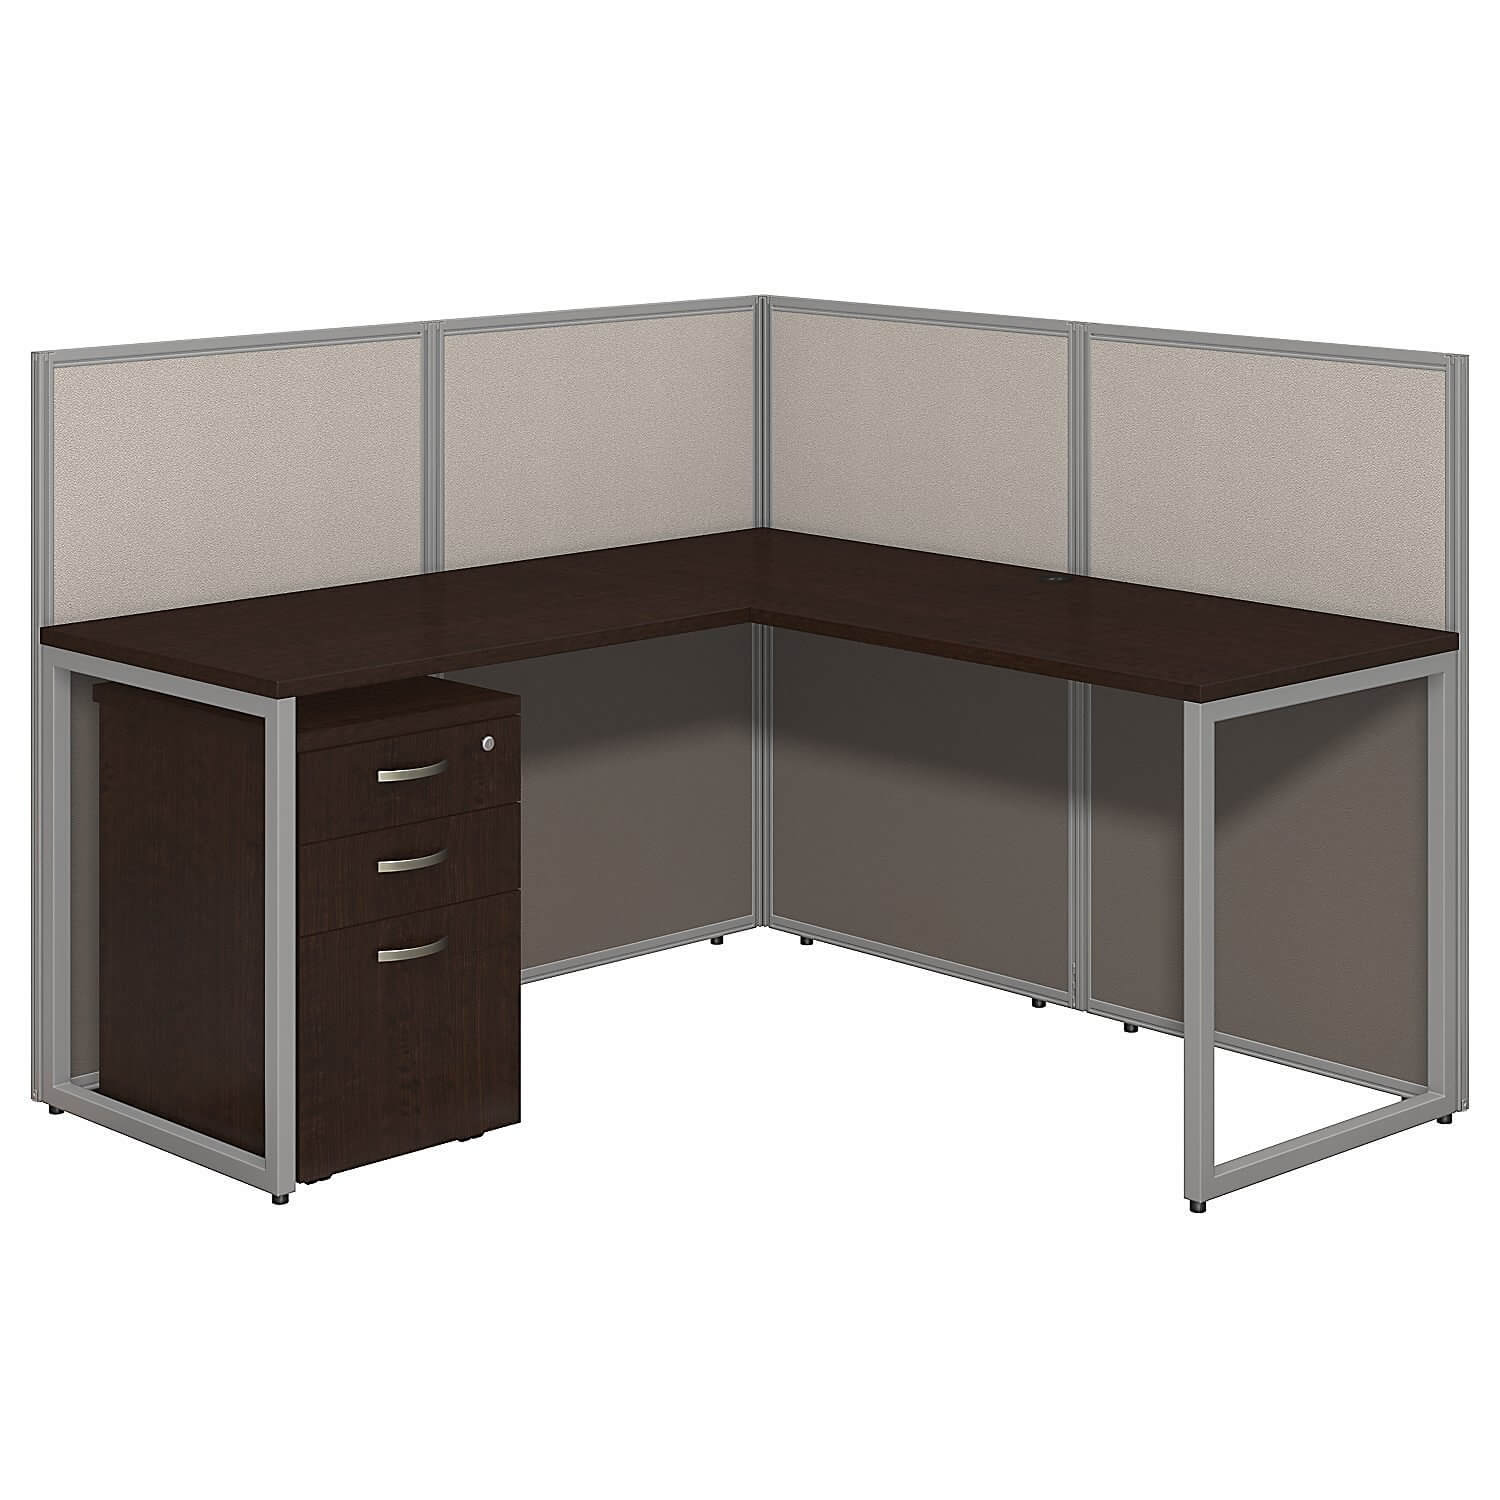 Business office furniture desk with panels l shape cubicle workstation with storage 60x60